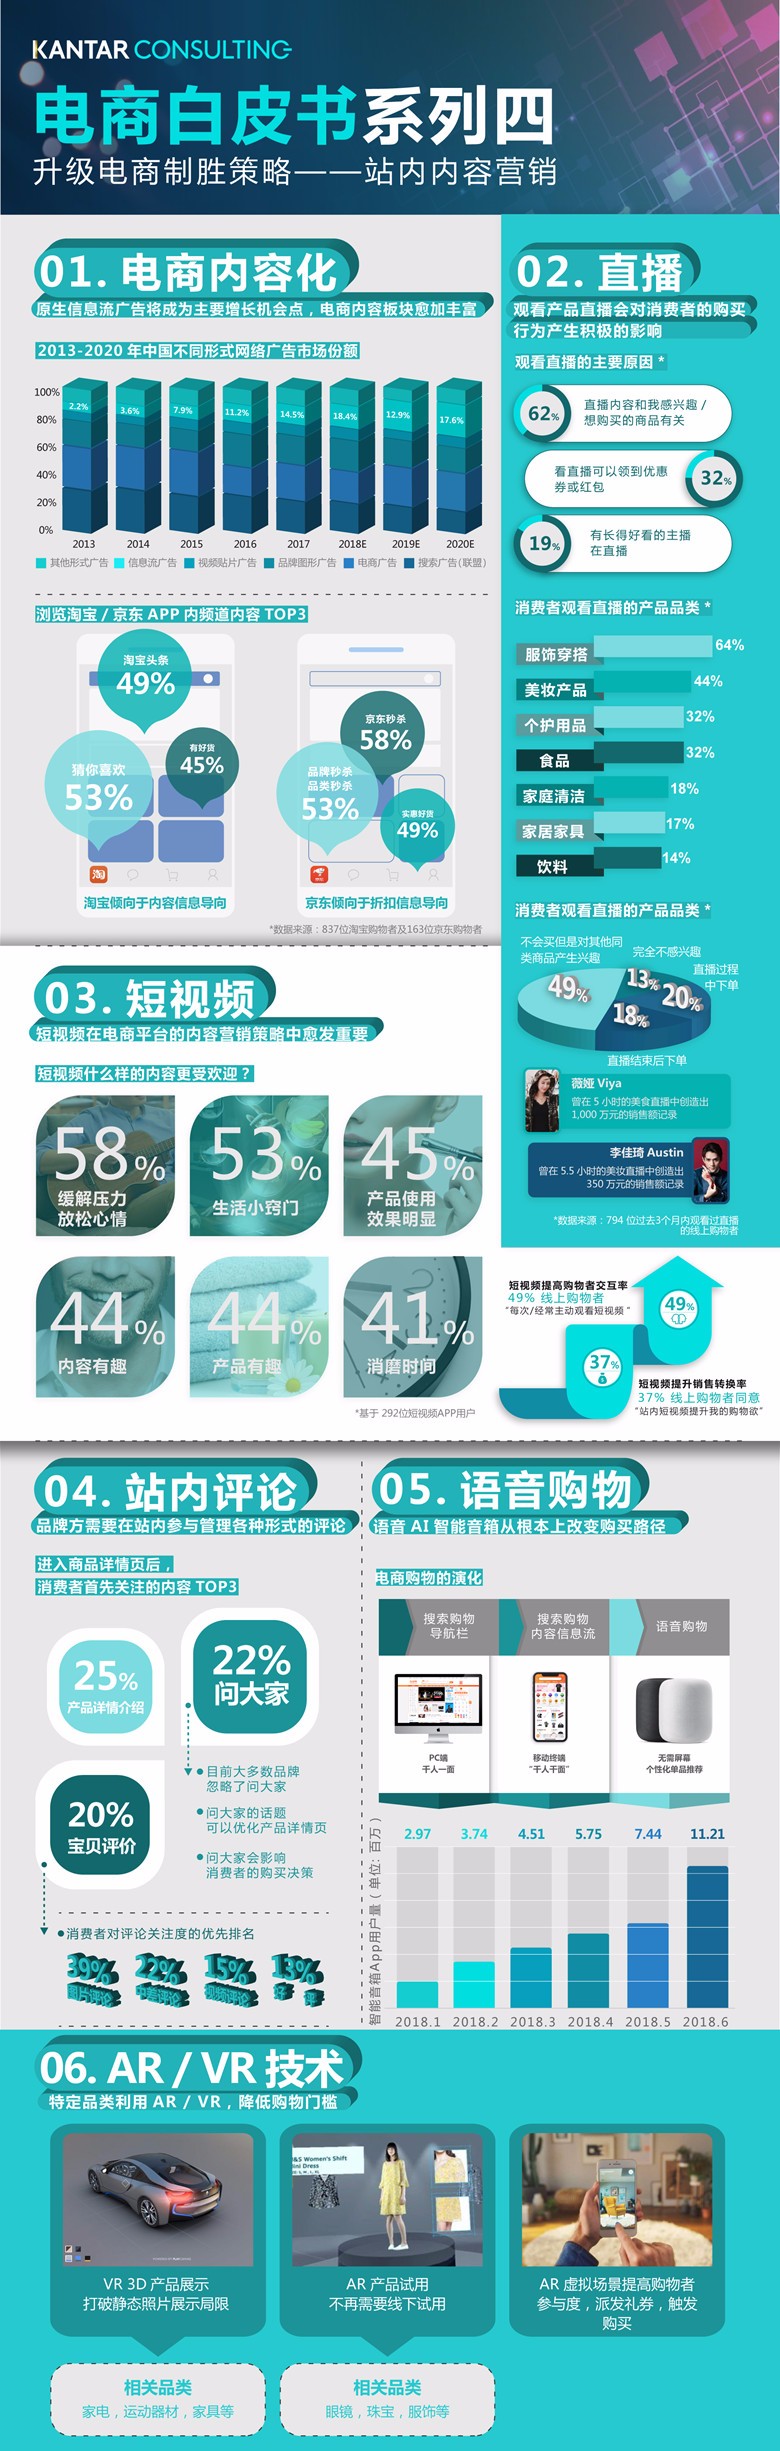 Contentstrategy-infographic-CN_副本.jpg